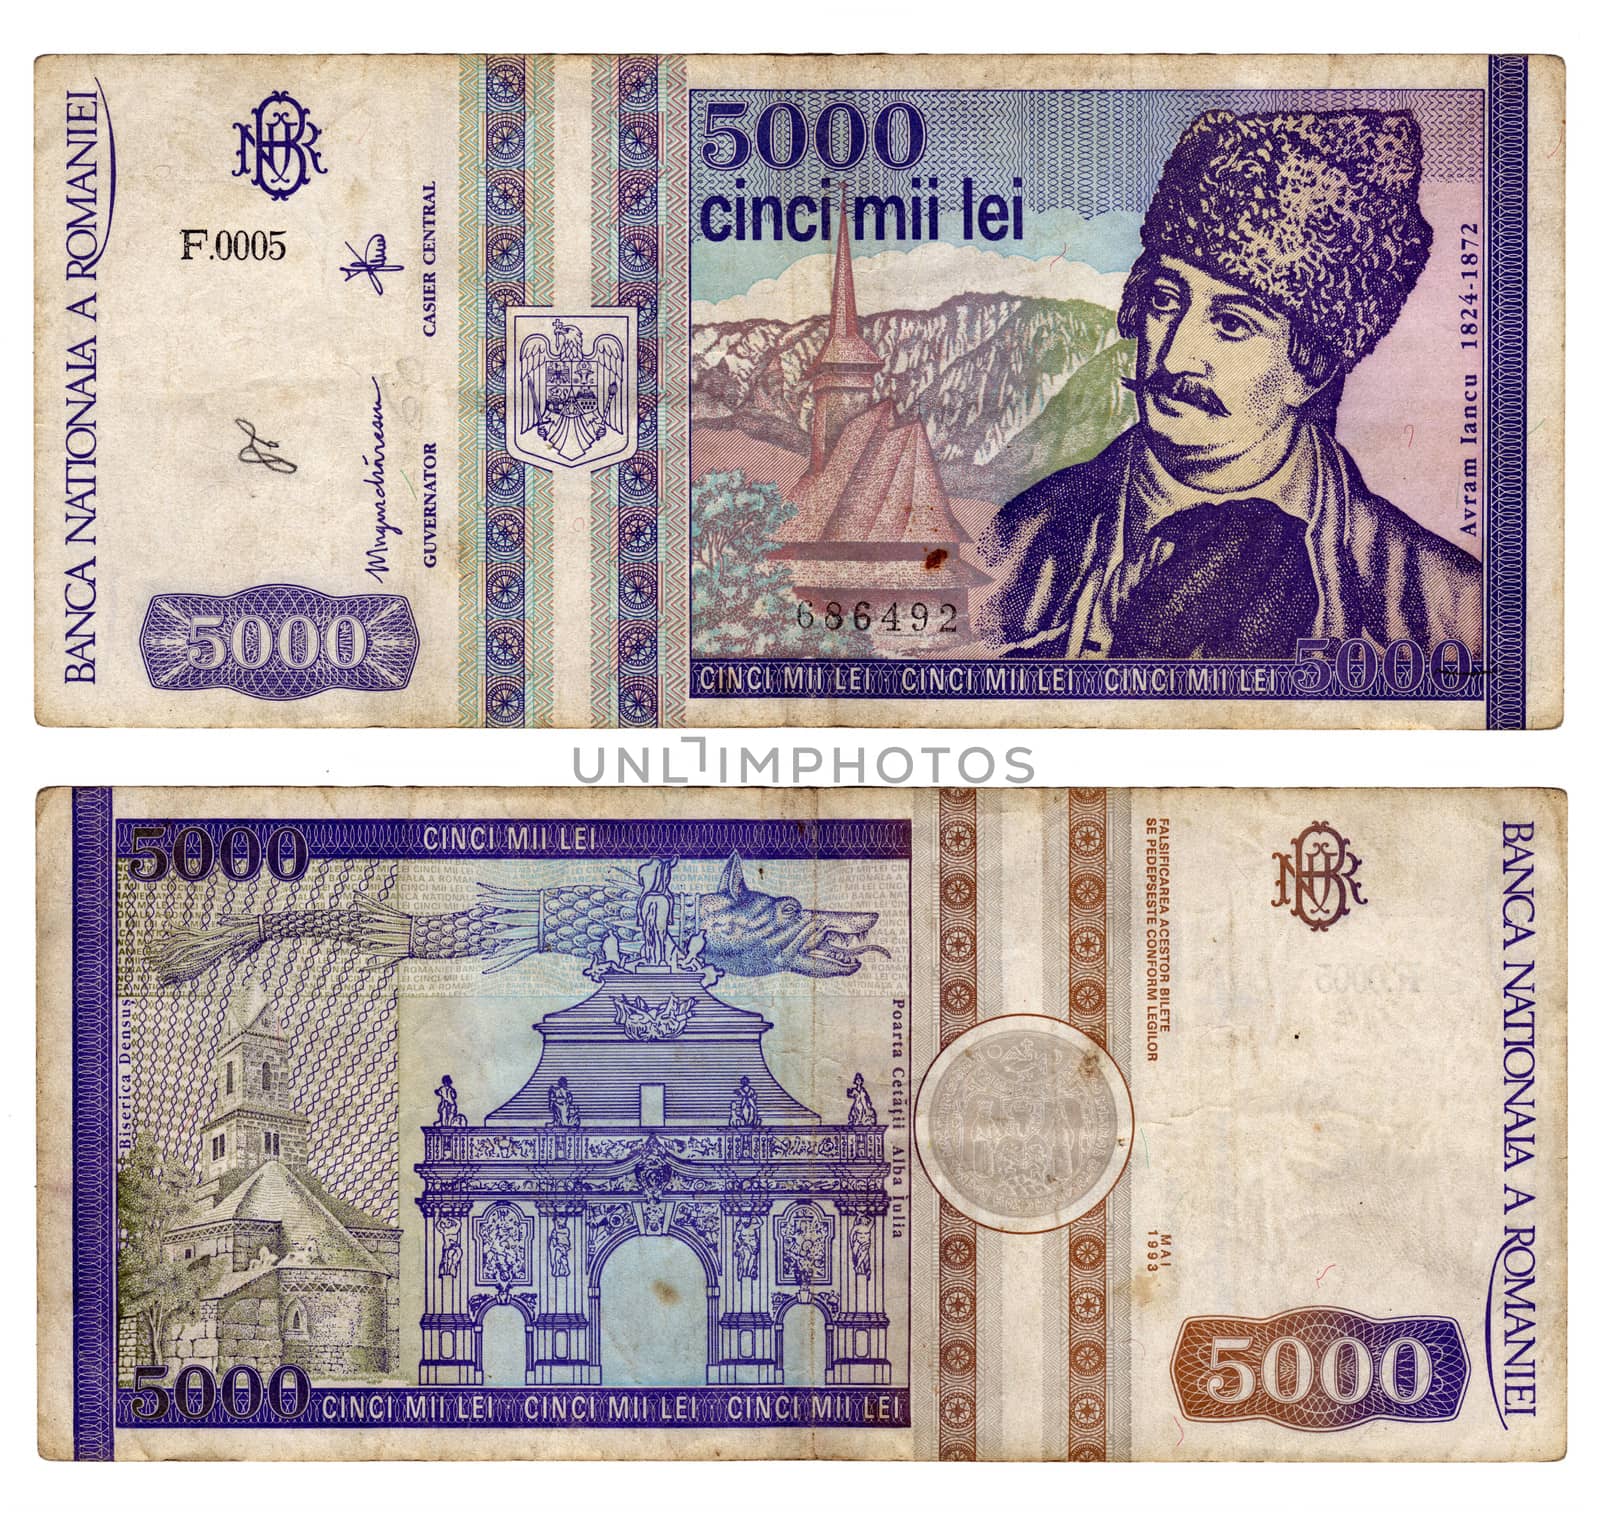 vintage romanian banknote from 1993 by ojal